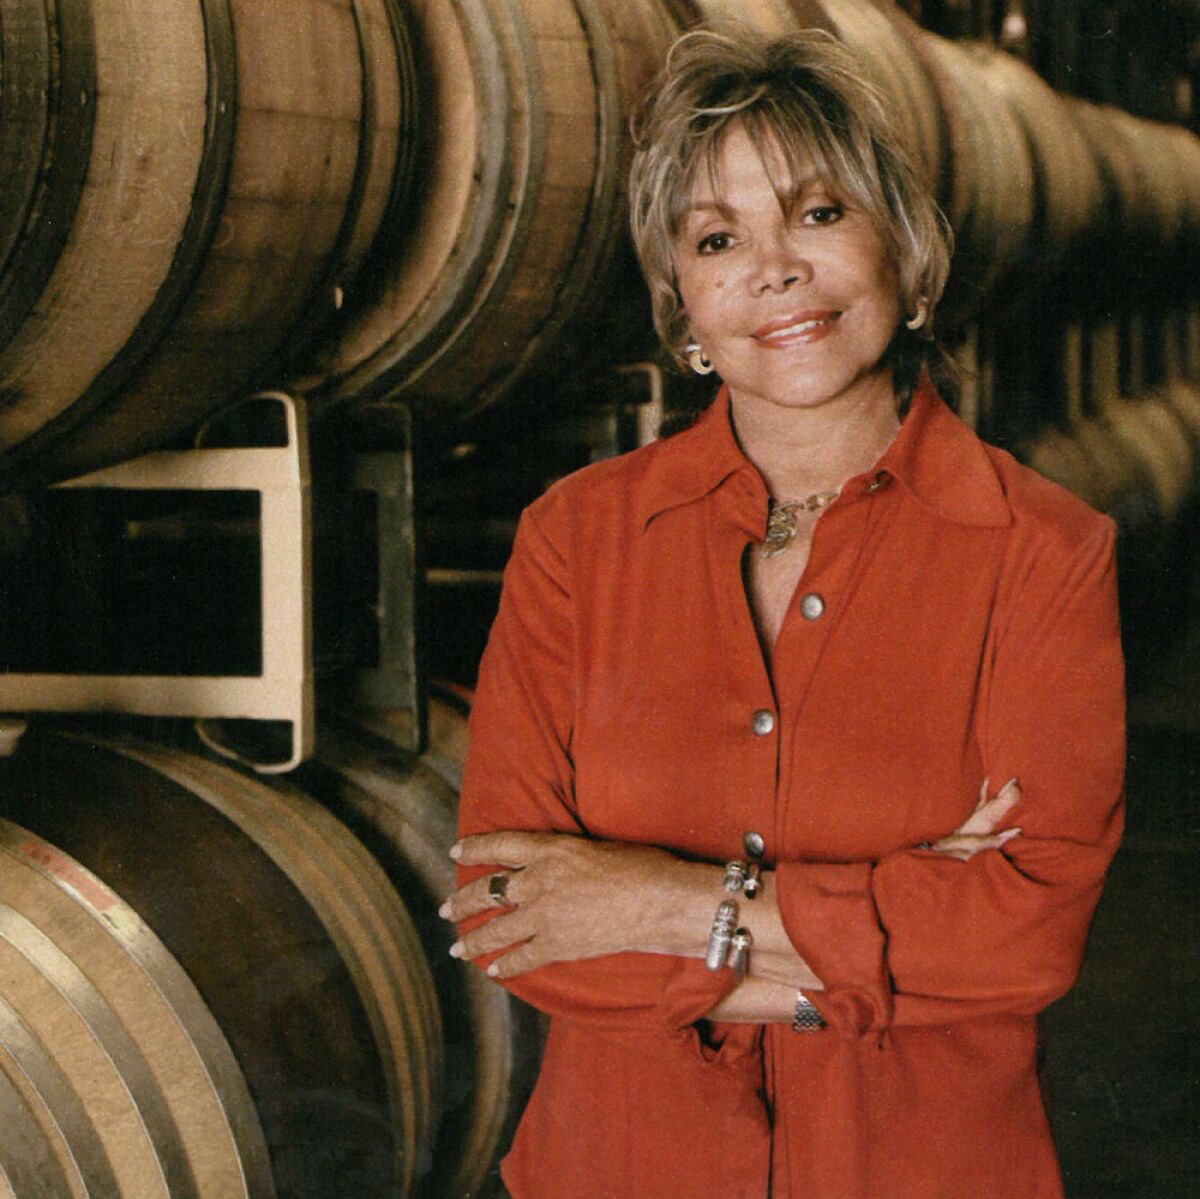 a woman standing in front of wine barrels with her arms crossed